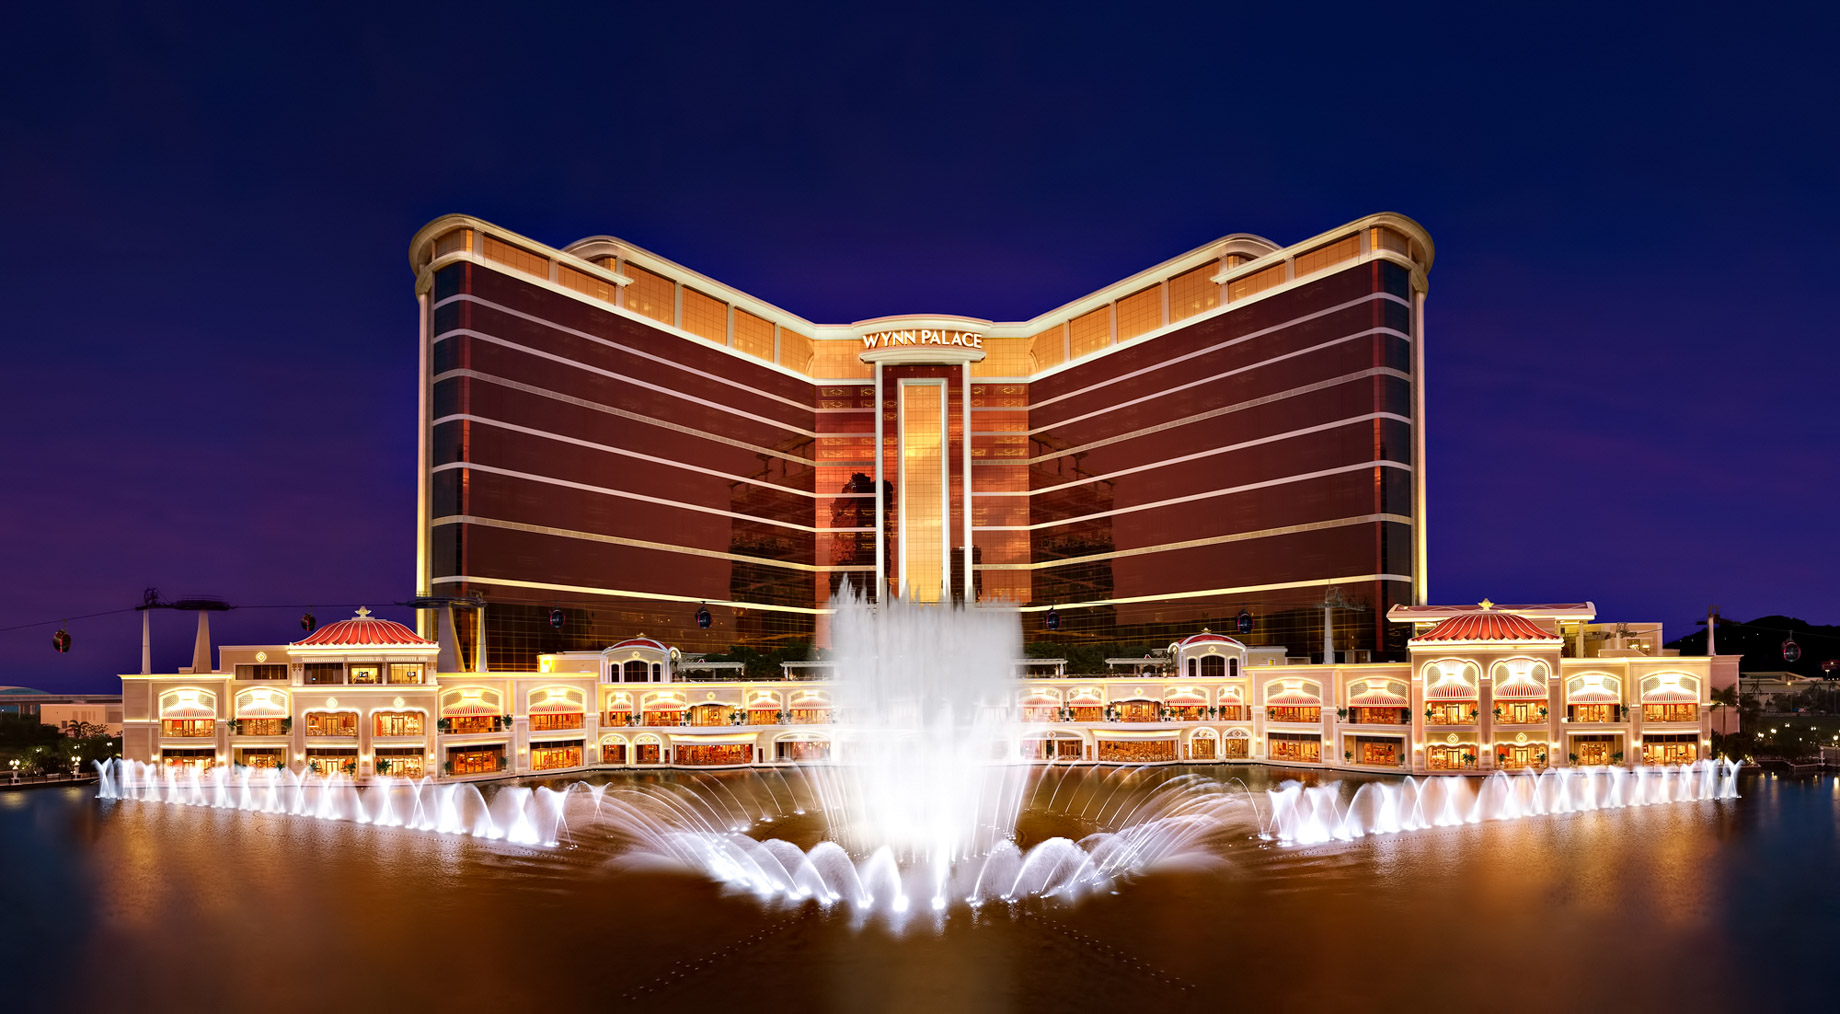 Wynn Palace Macau – Billion Dollar Buildings – The Most Expensive Casino Properties in the World